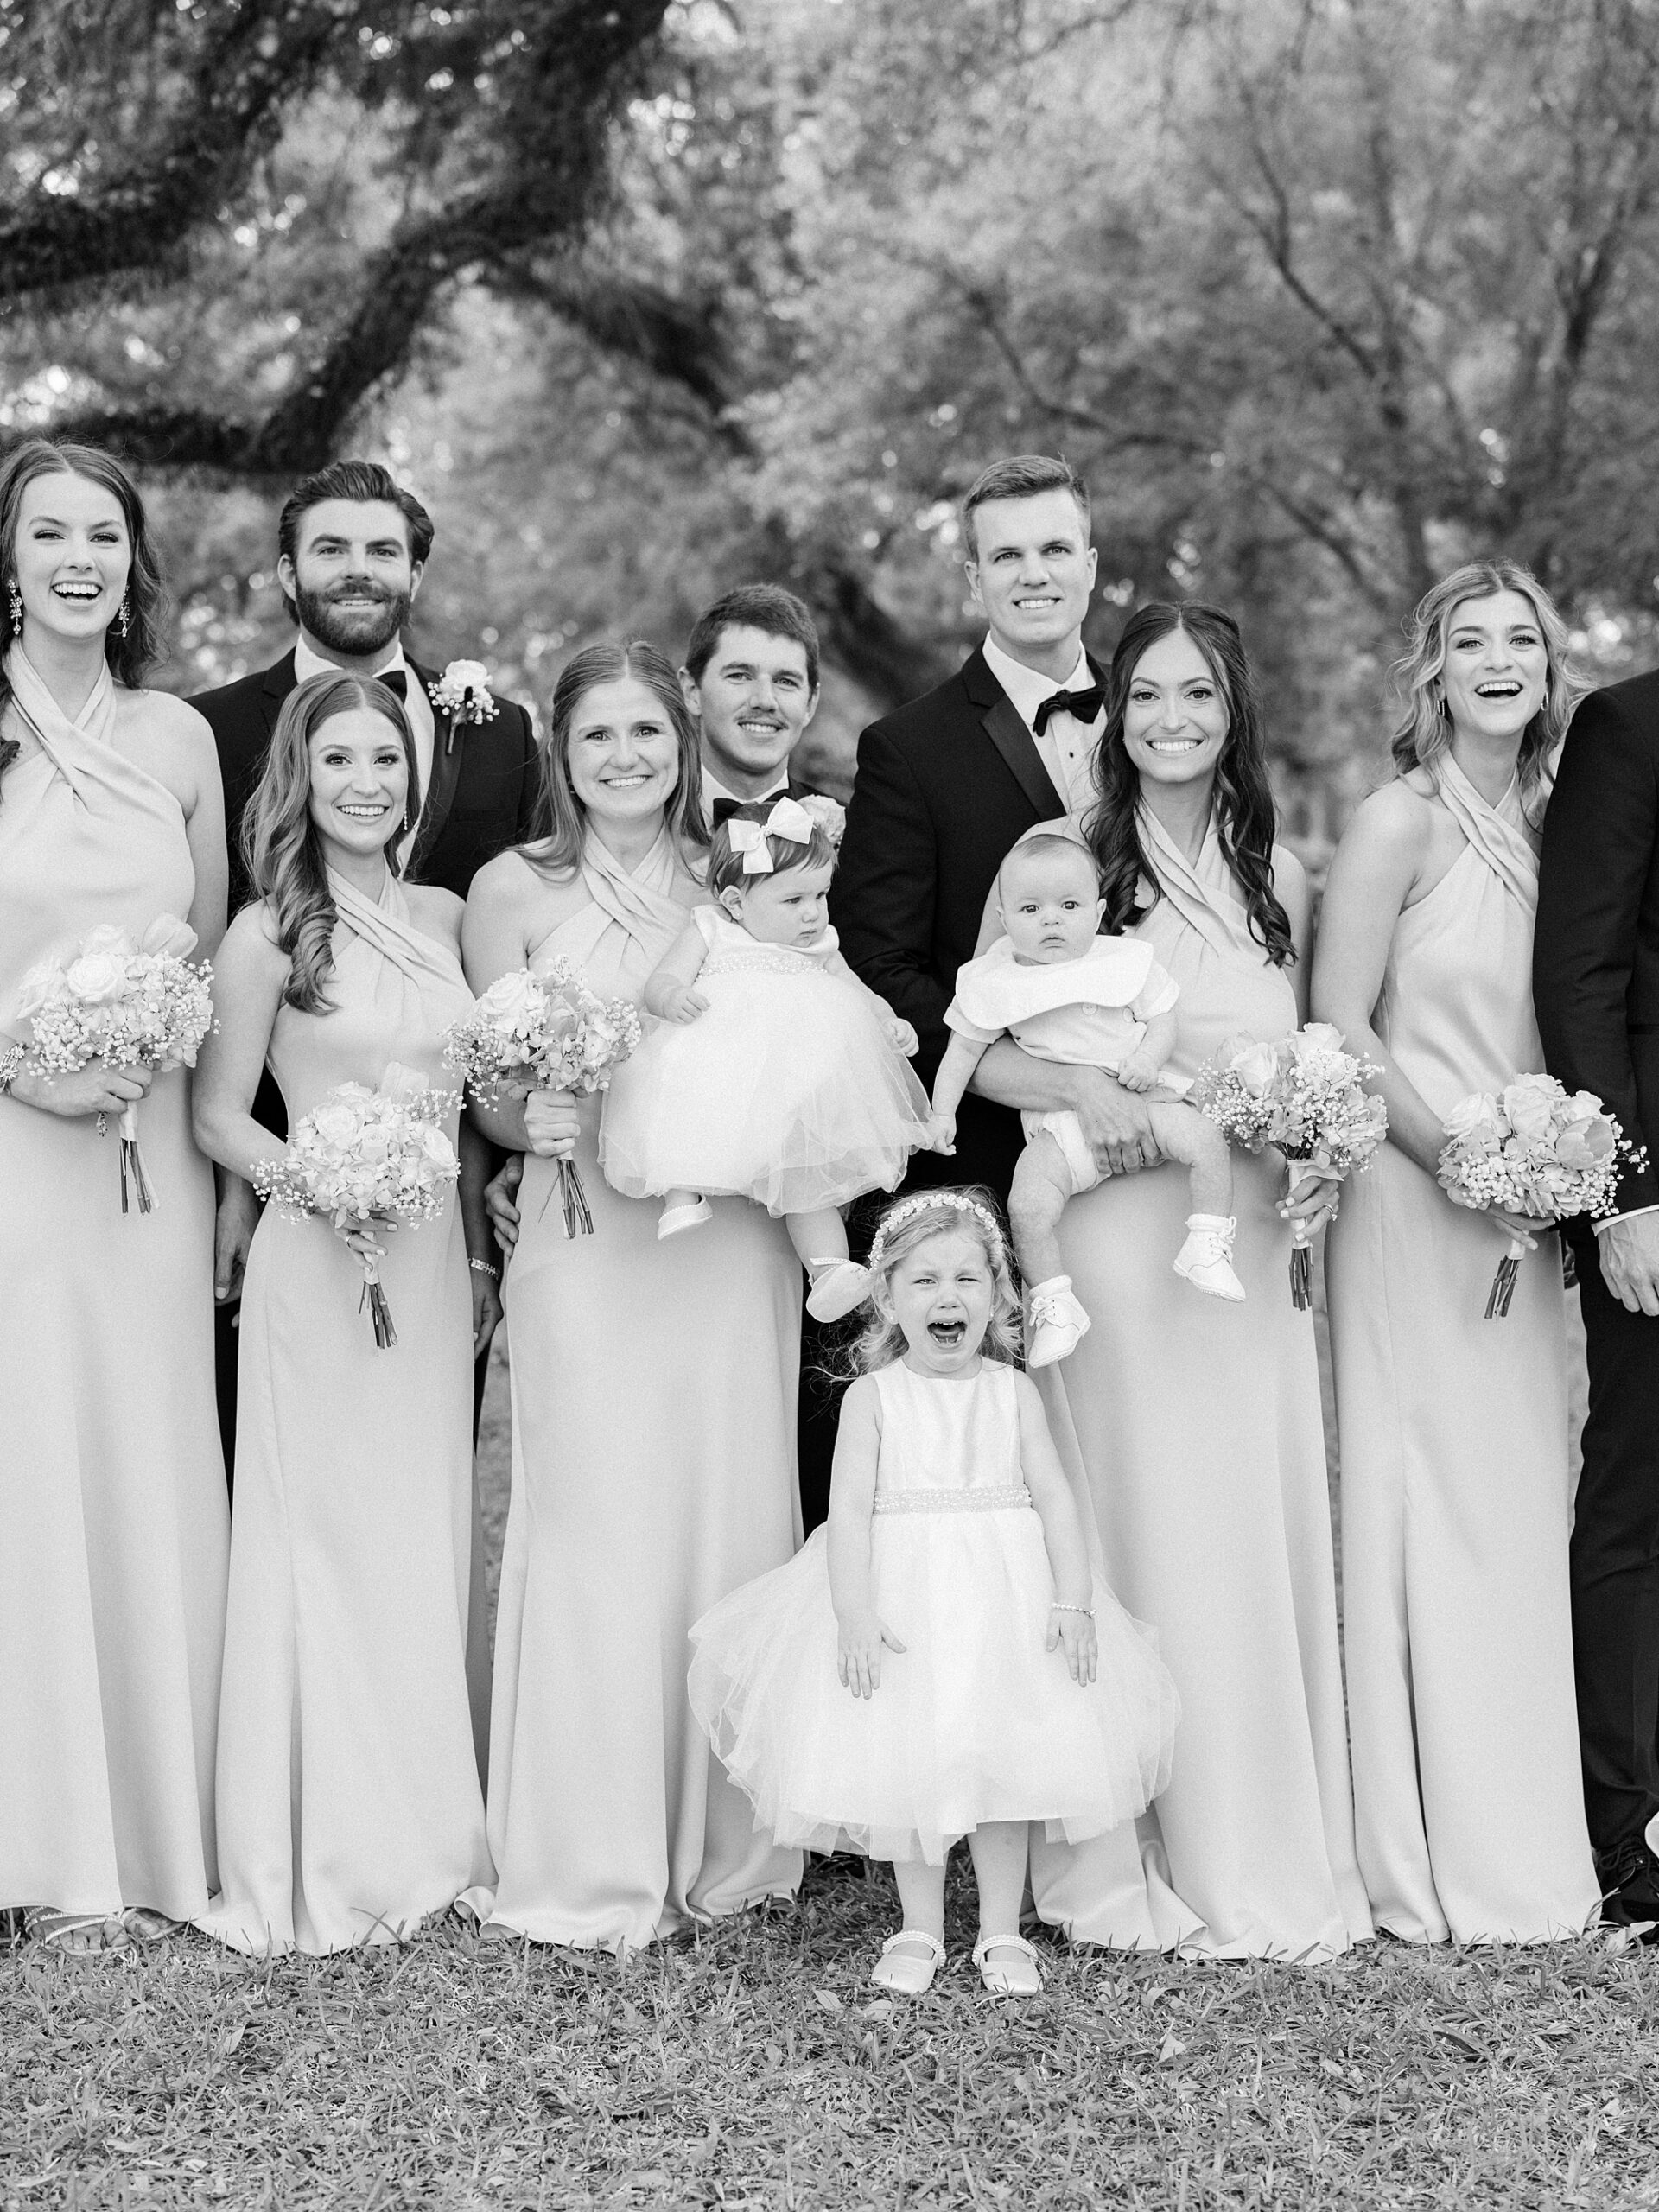 newlyweds pose with wedding party including small flower girls